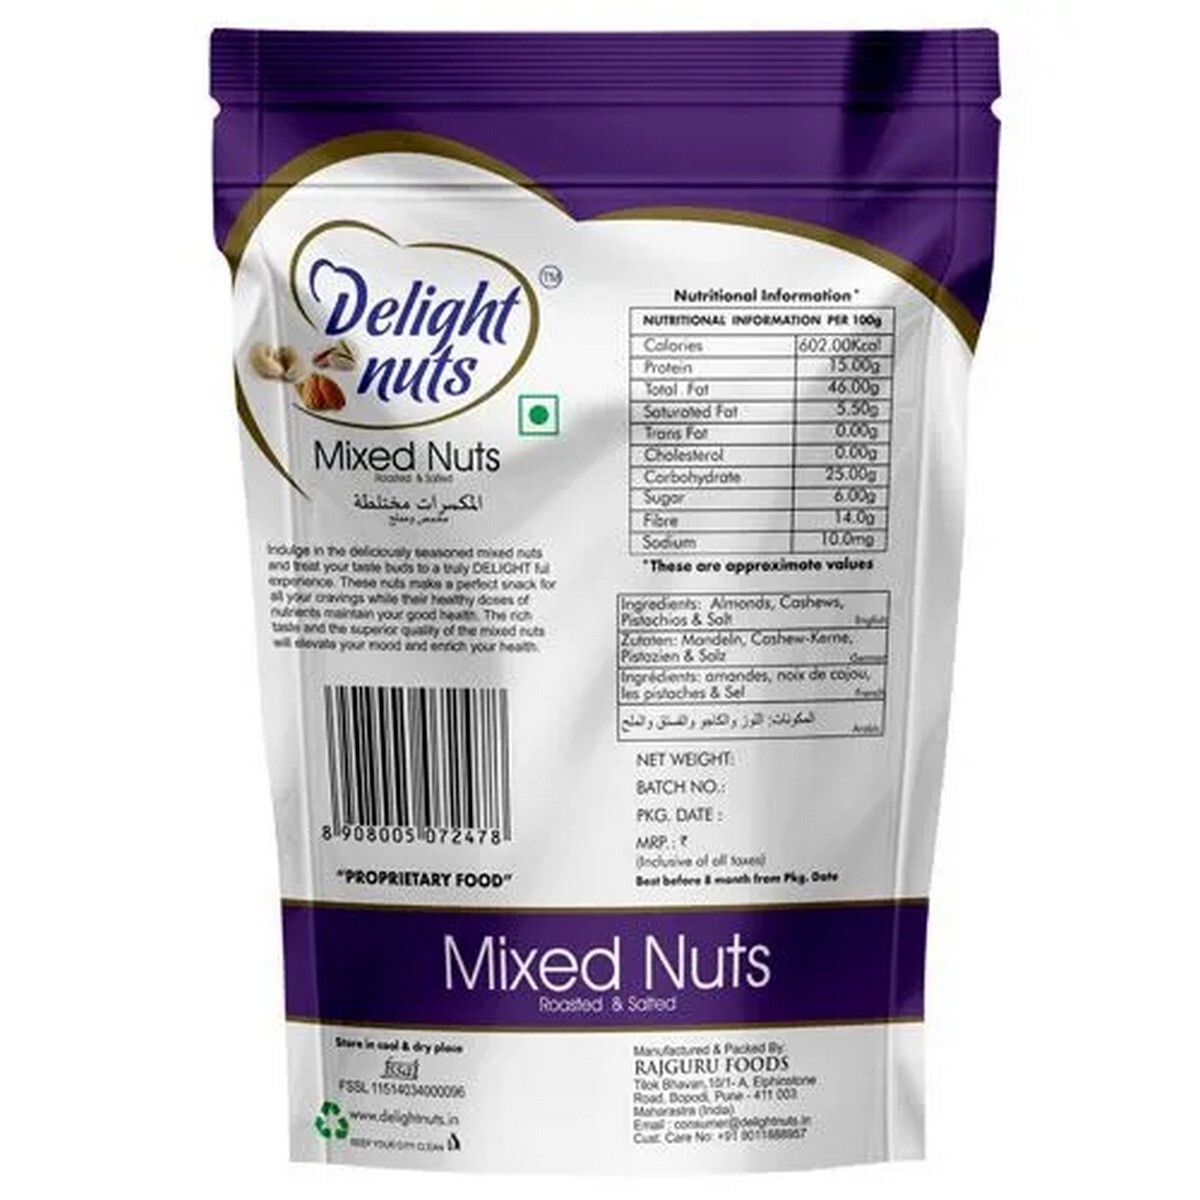 DeLindt ut Dryfruits Mixed Nuts200g